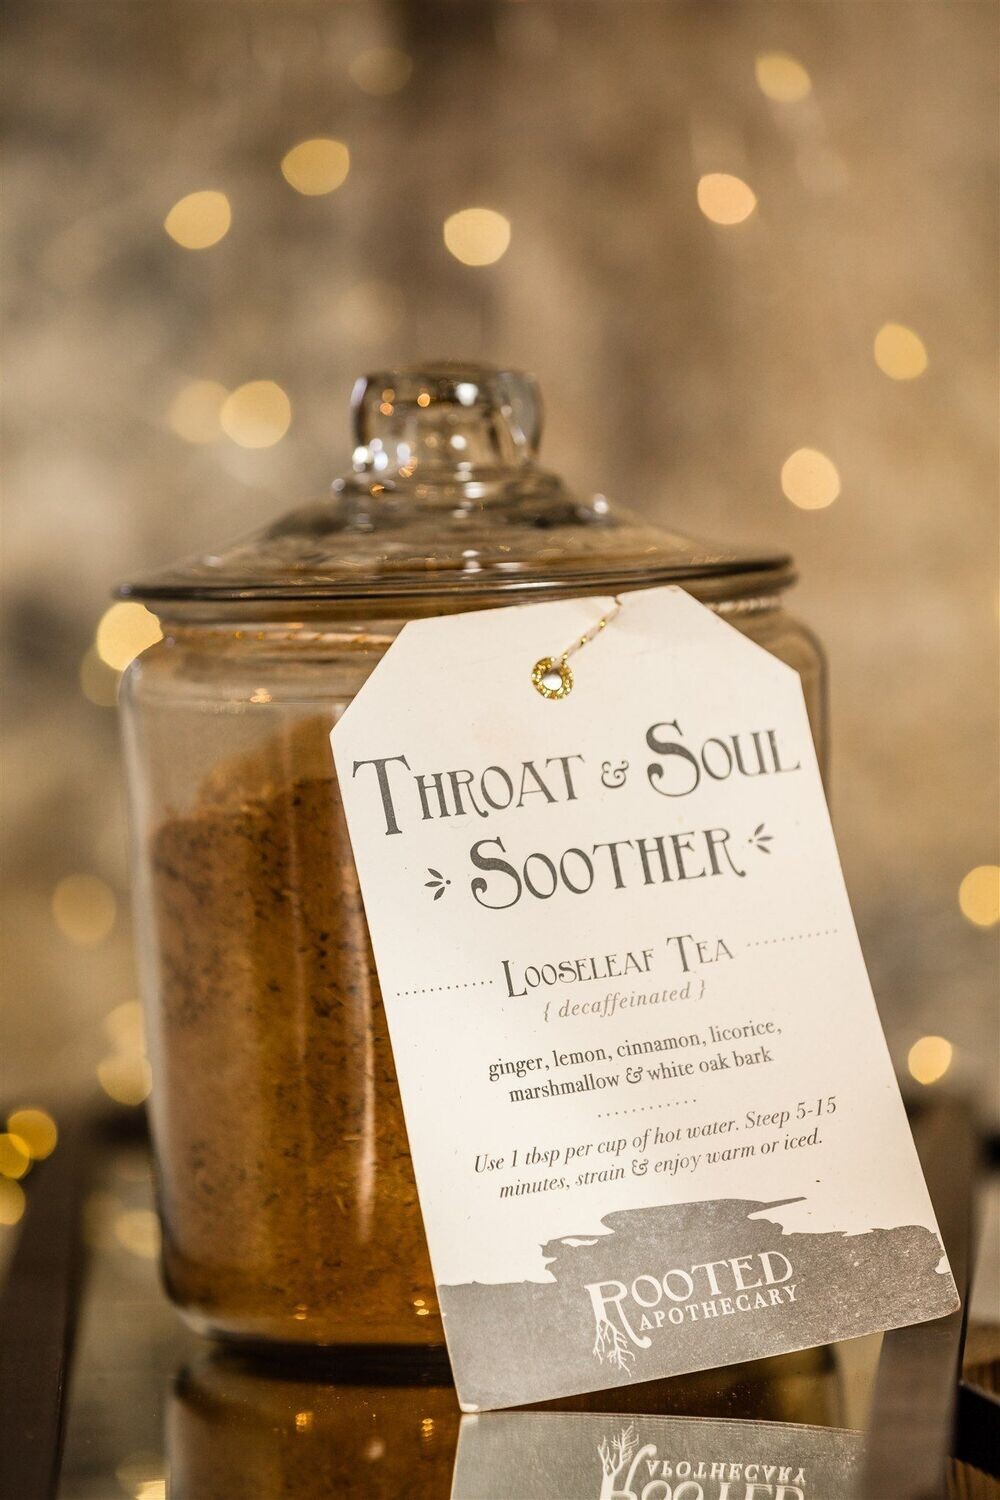 Throat and Soul Soother, Size: 1 oz